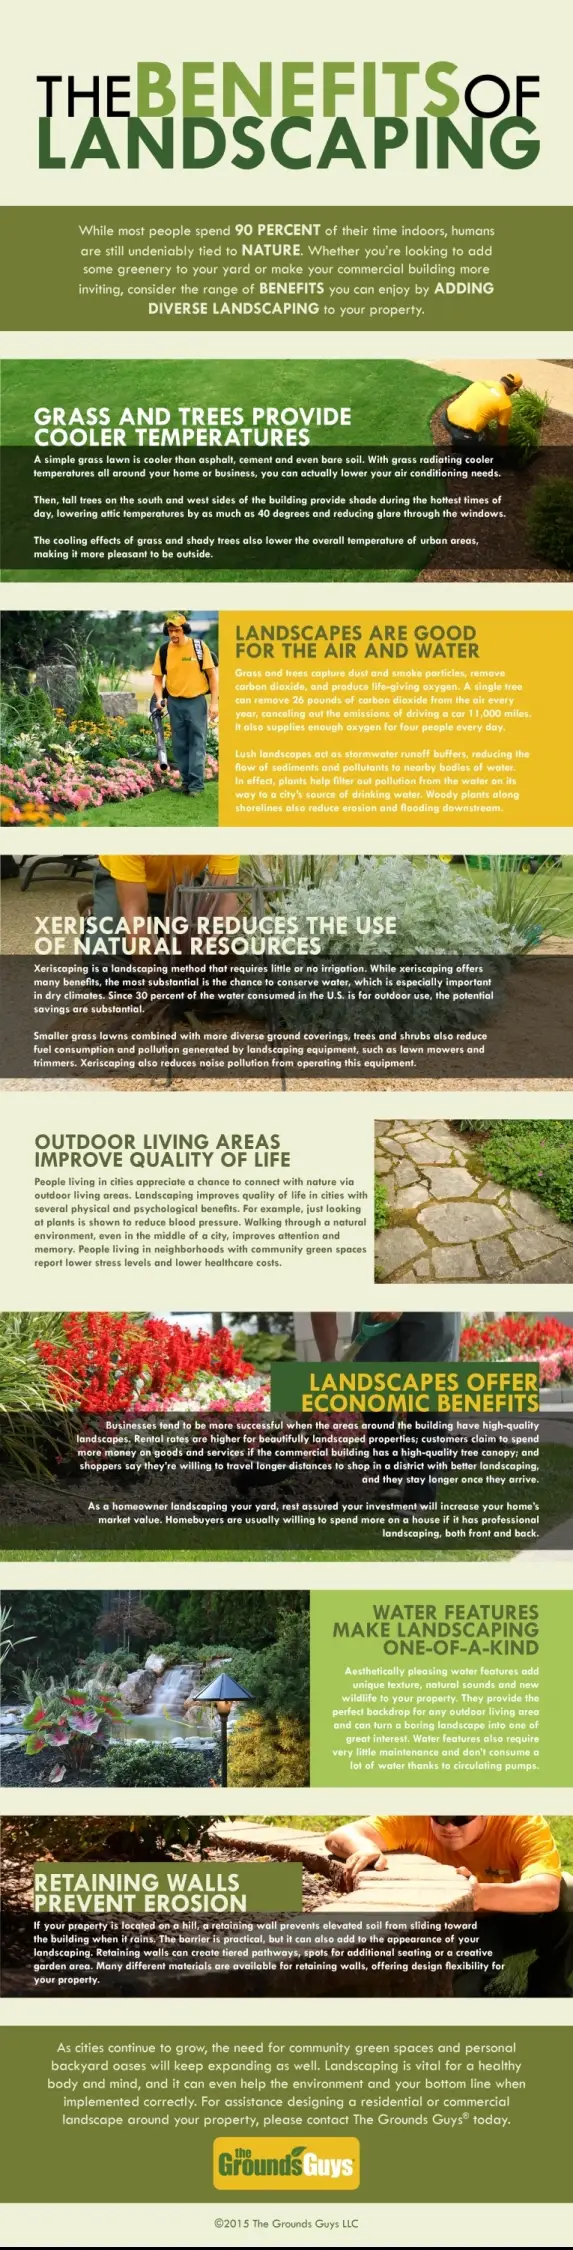 Benefit of landscaping infographic